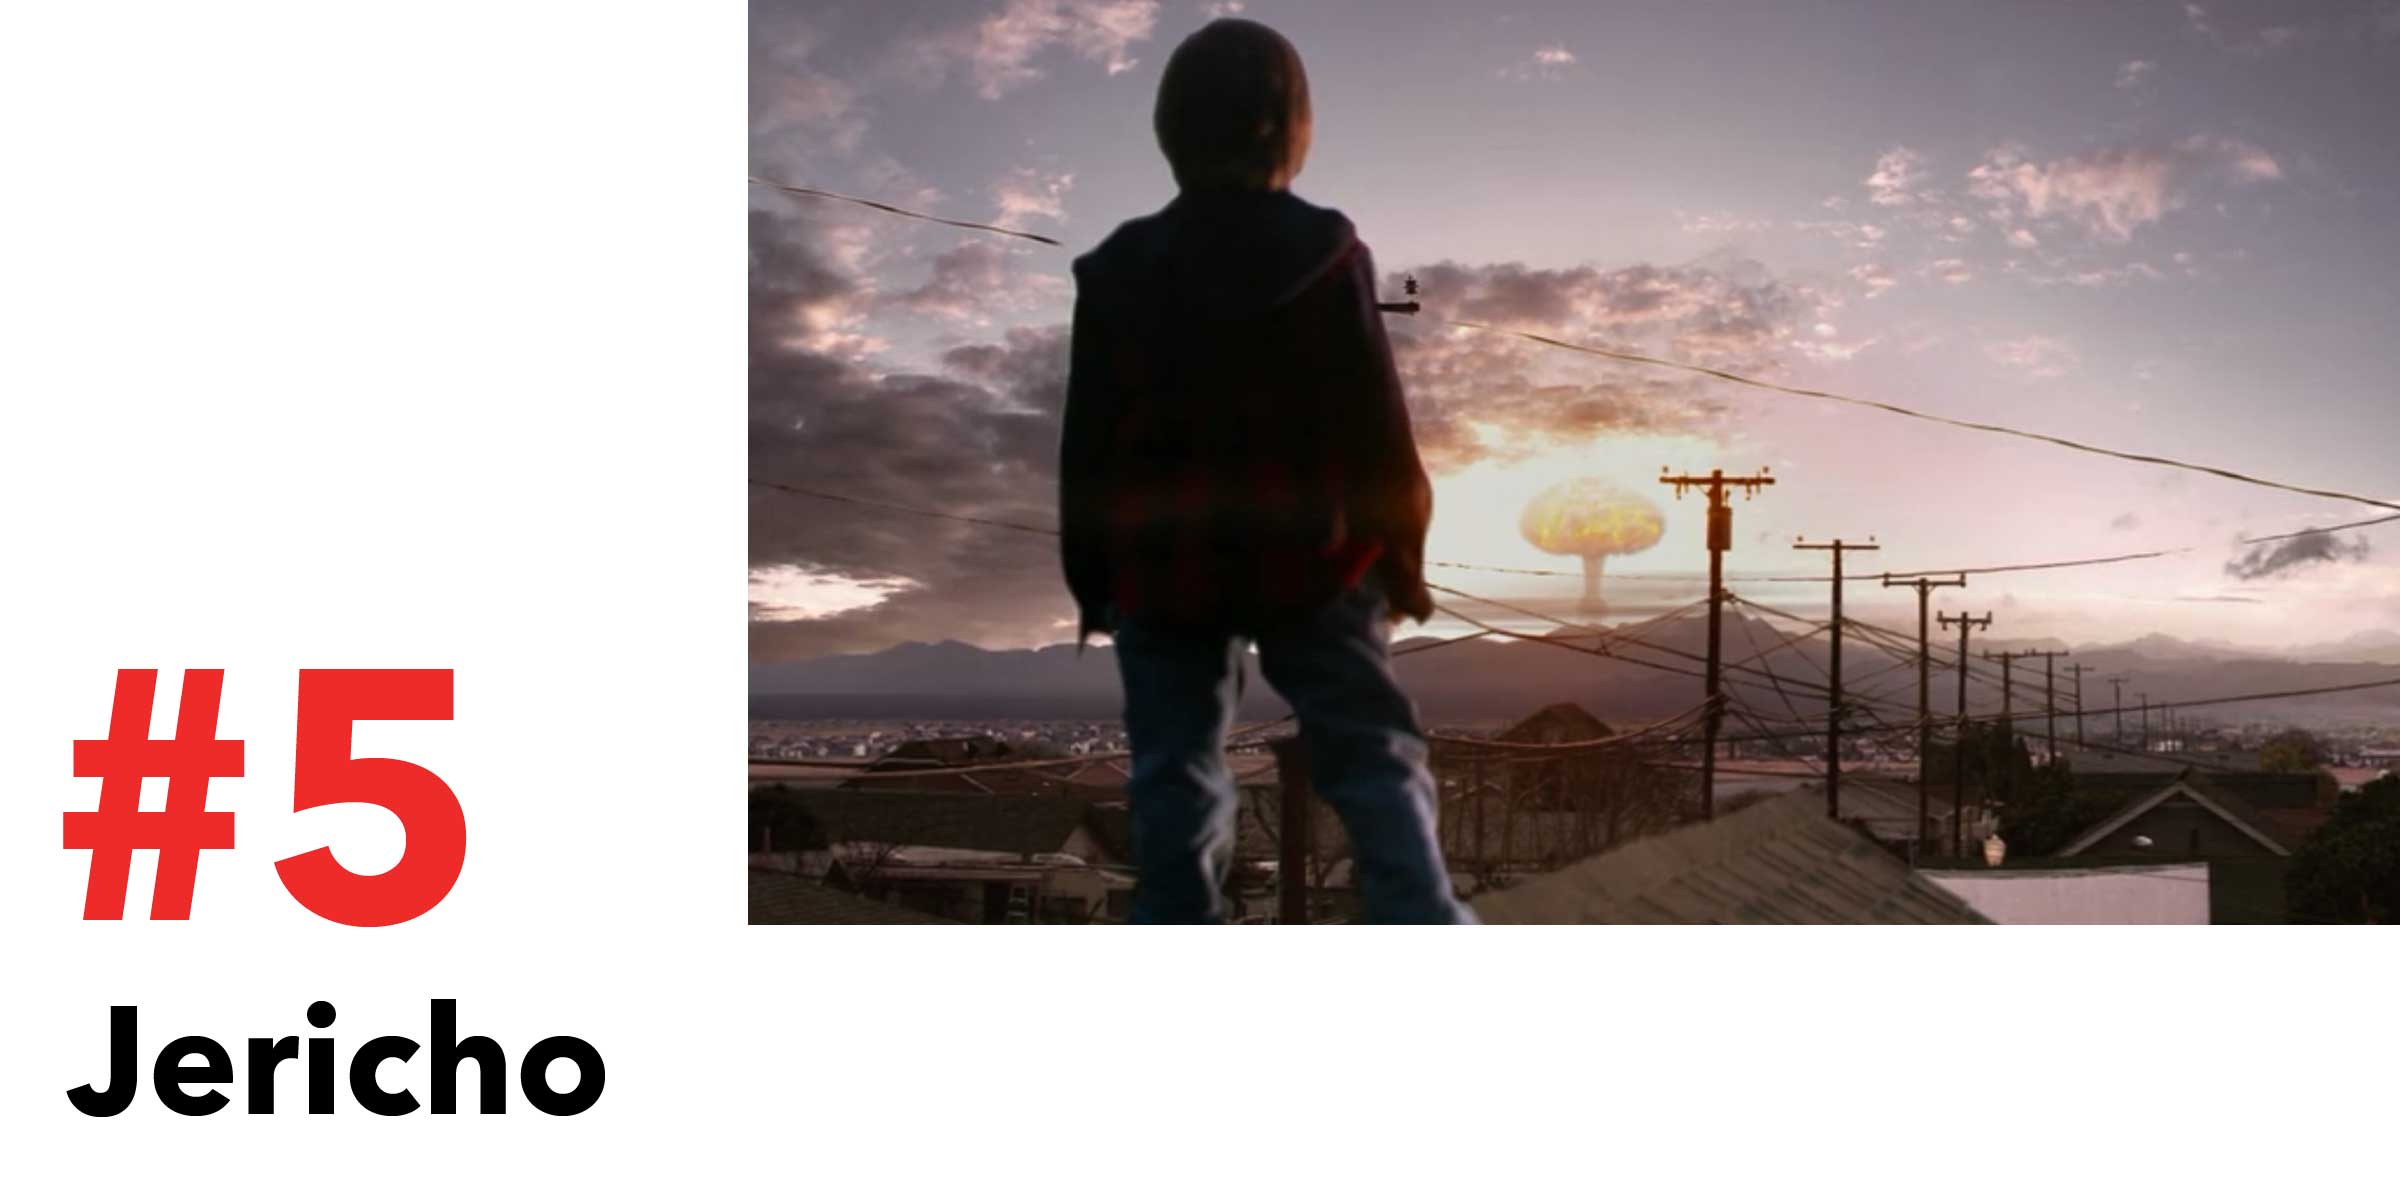 A boy stands on a roof, watching a nuclear explosion